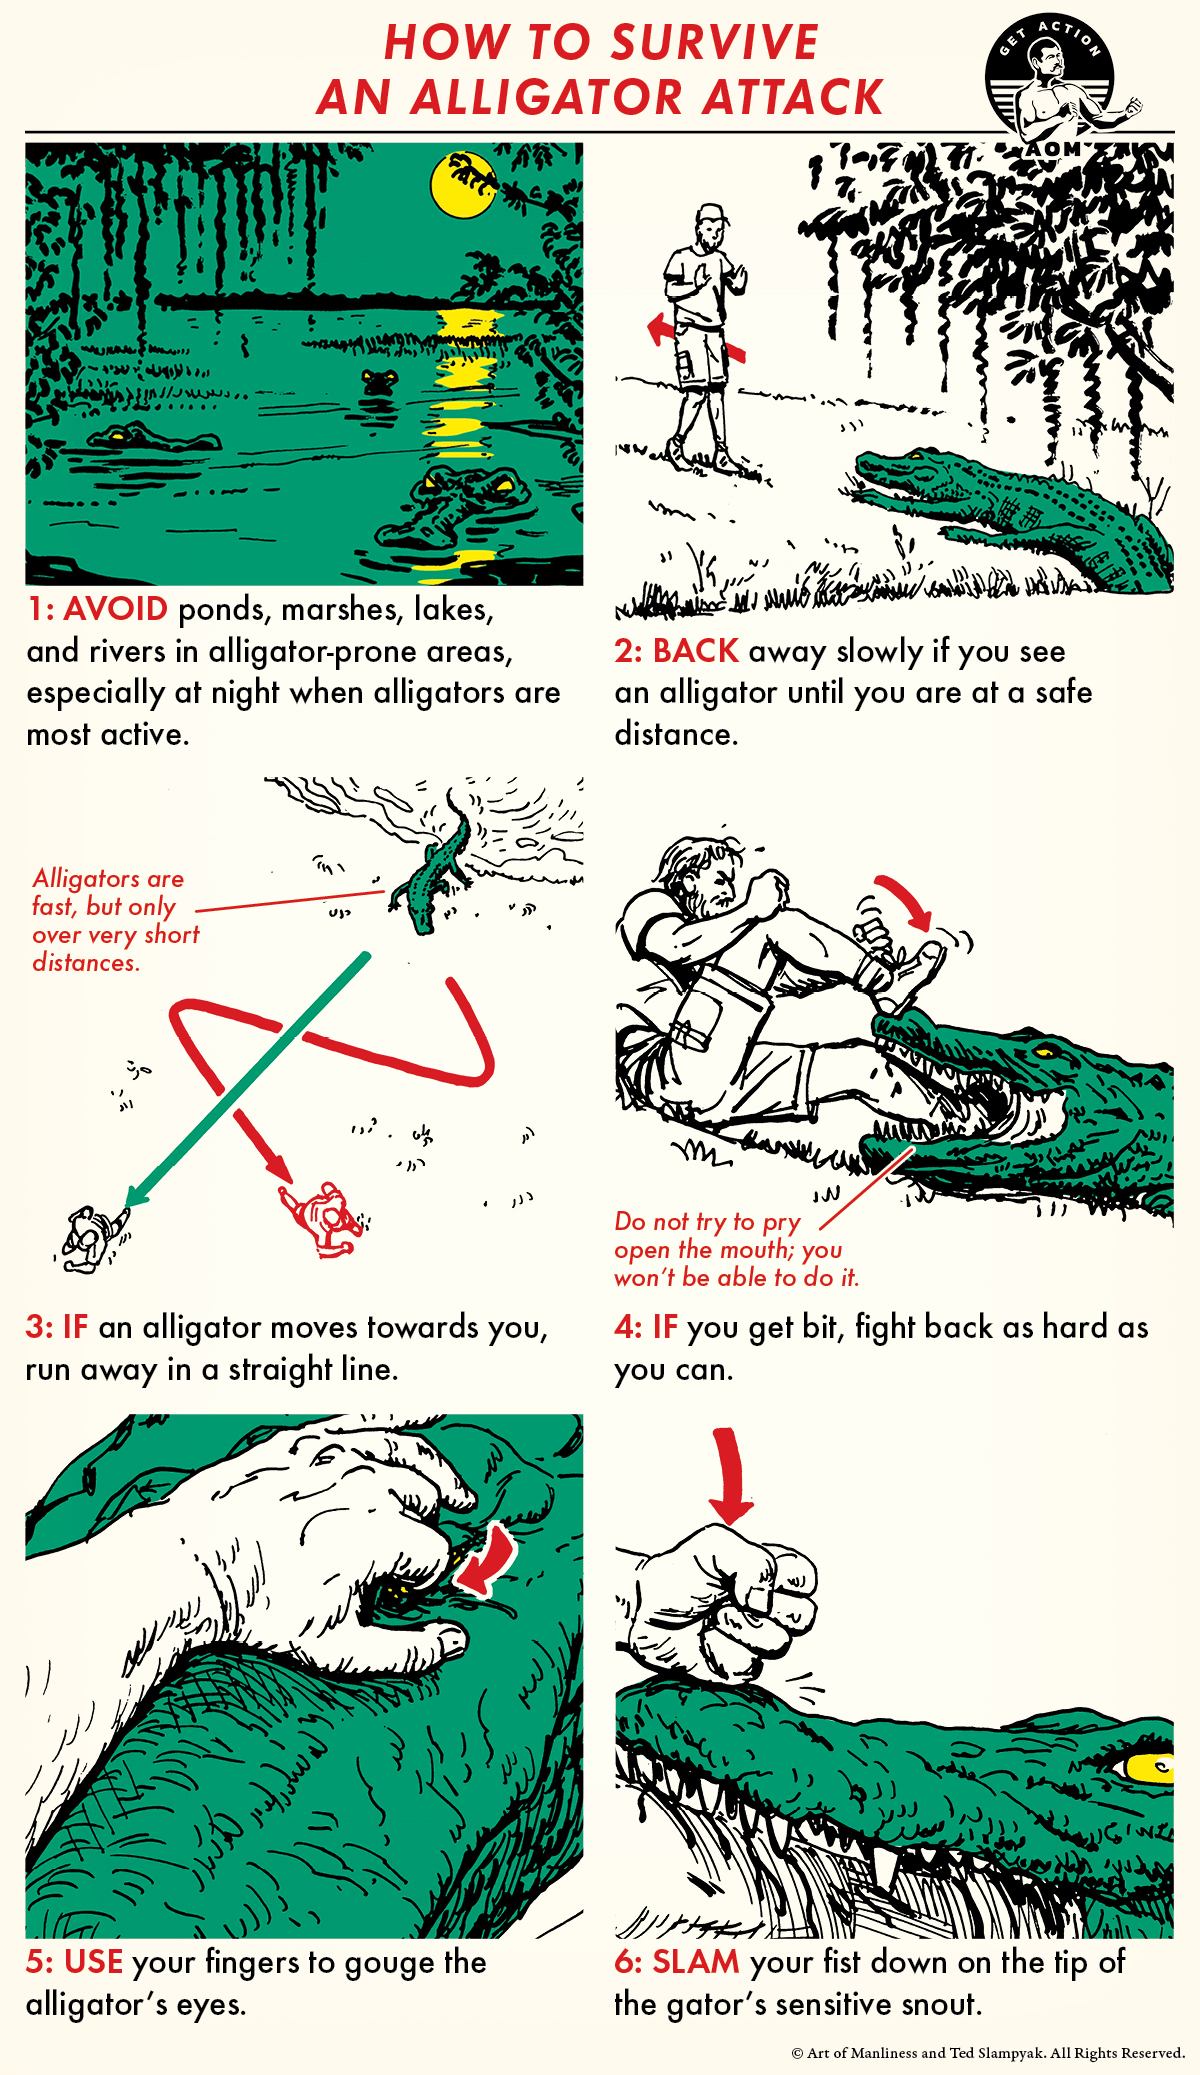 A comic guide of how to survive an alligator attack.